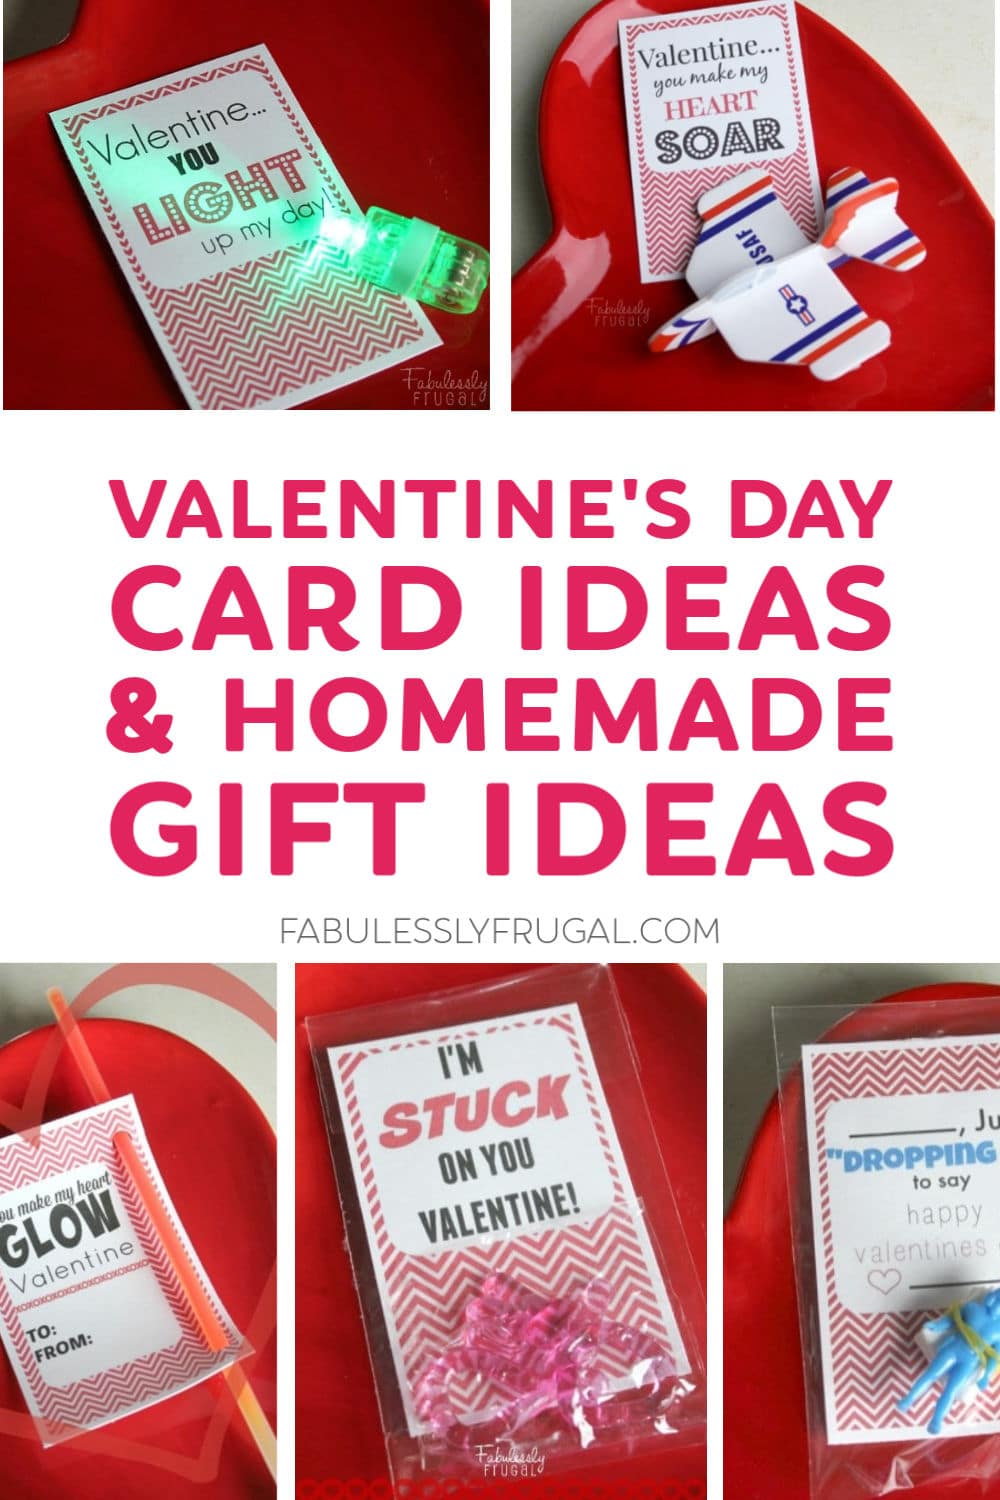 Valentine's day card ideas and homemade gifts